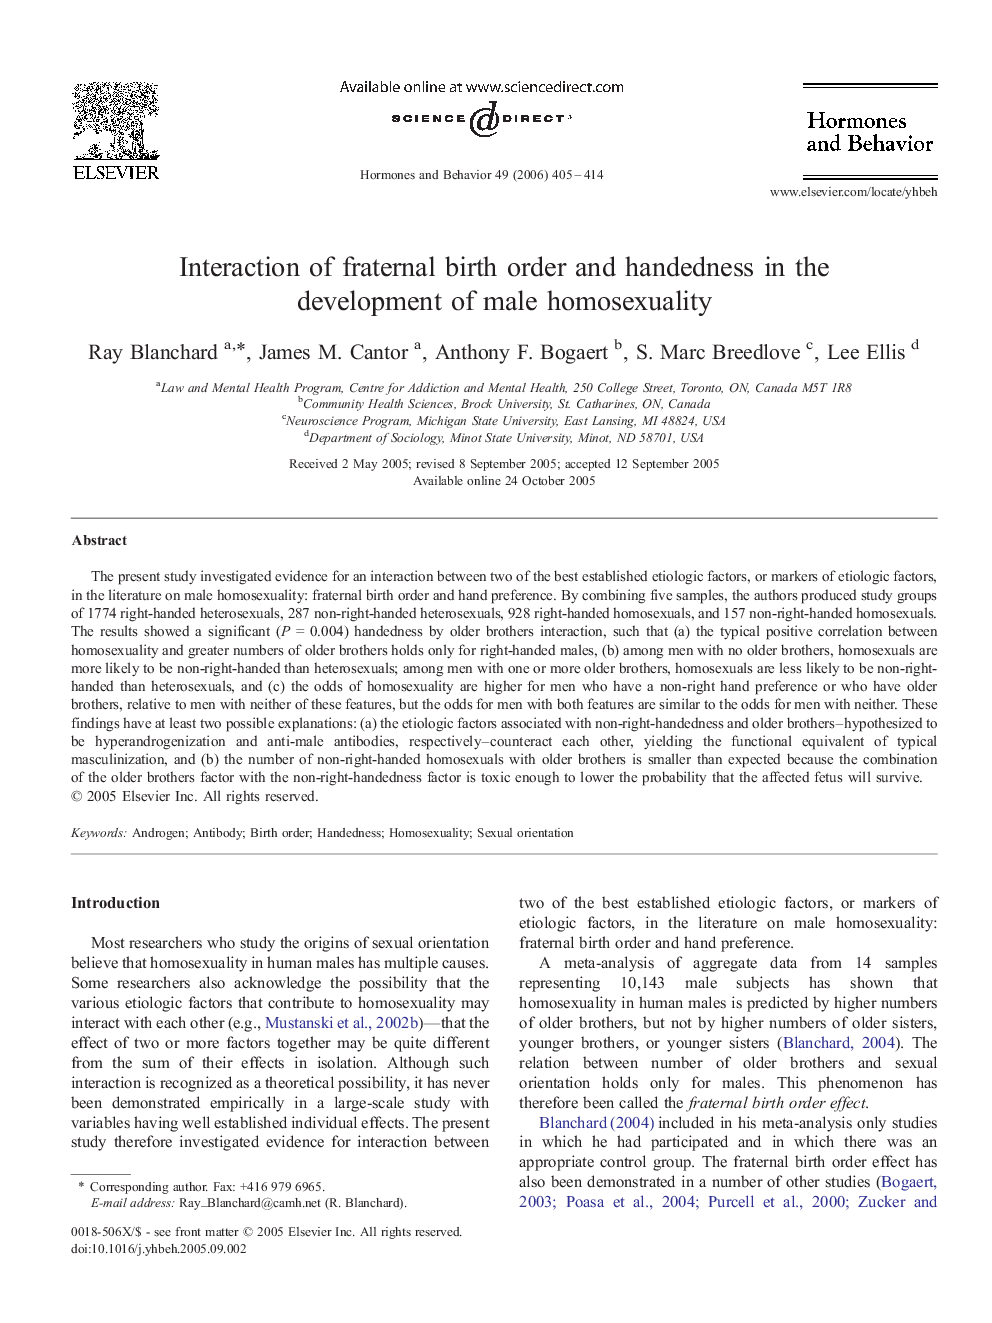 Interaction of fraternal birth order and handedness in the development of male homosexuality